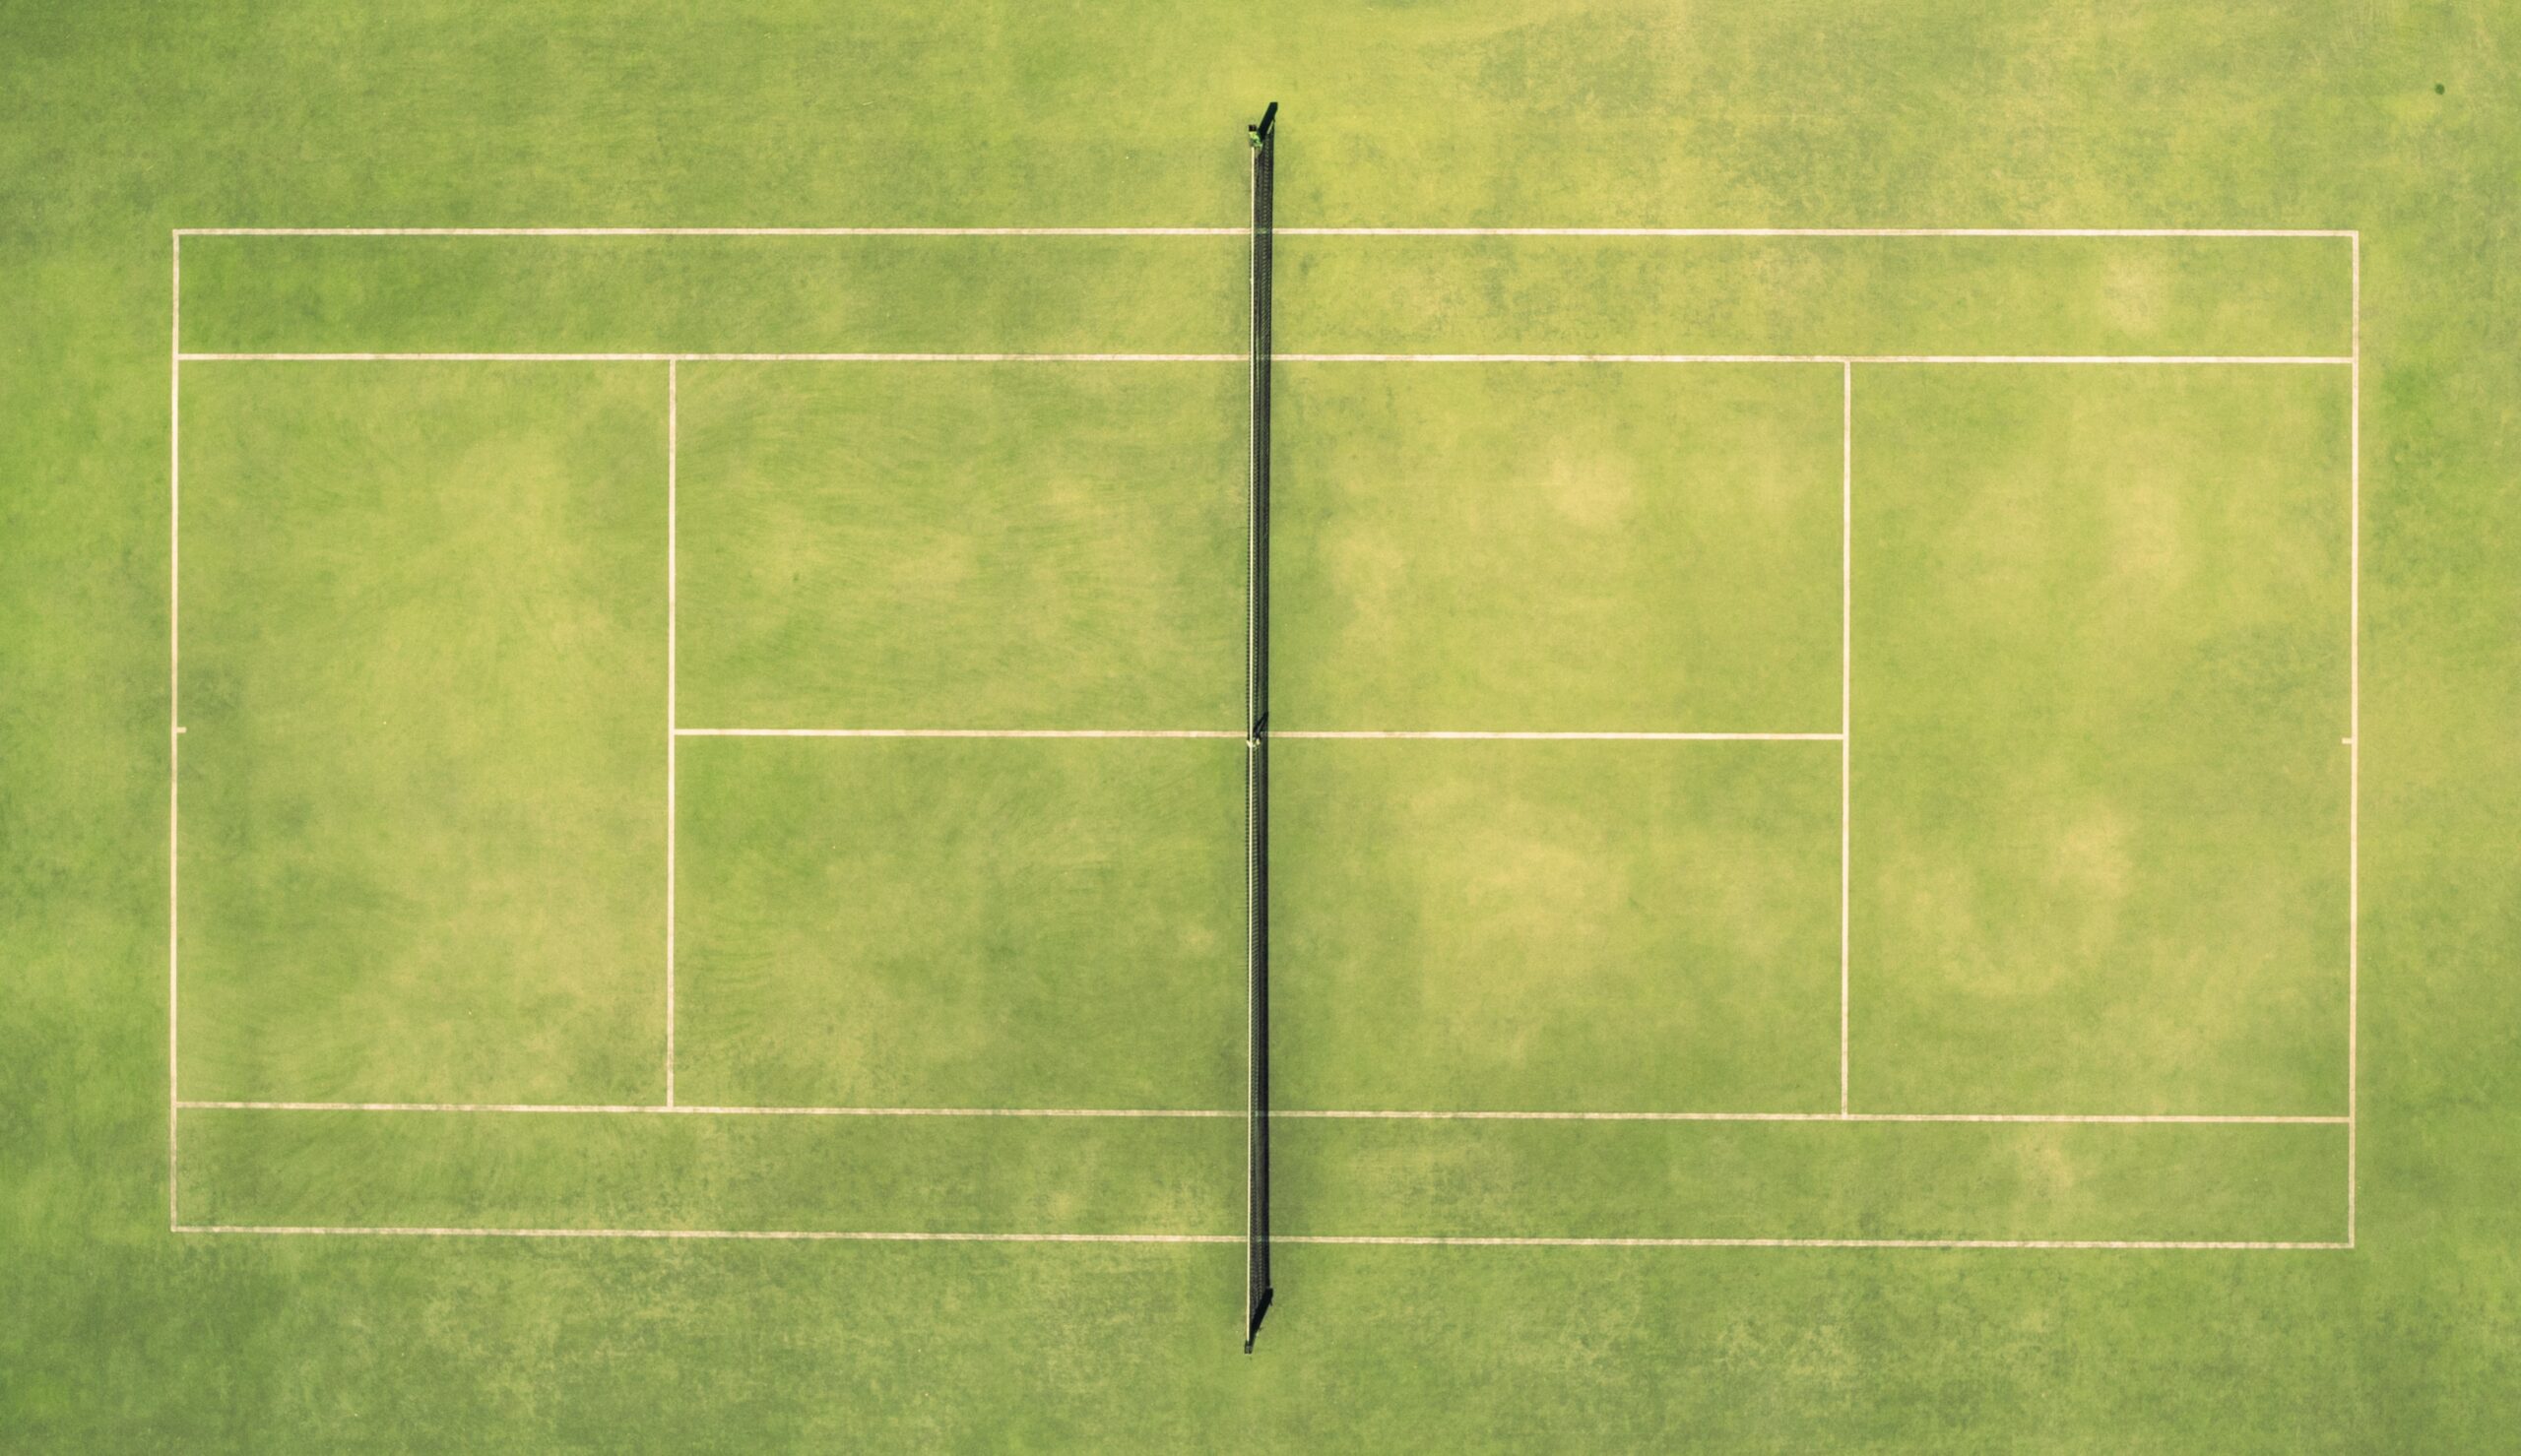 The Tapestry of Tennis